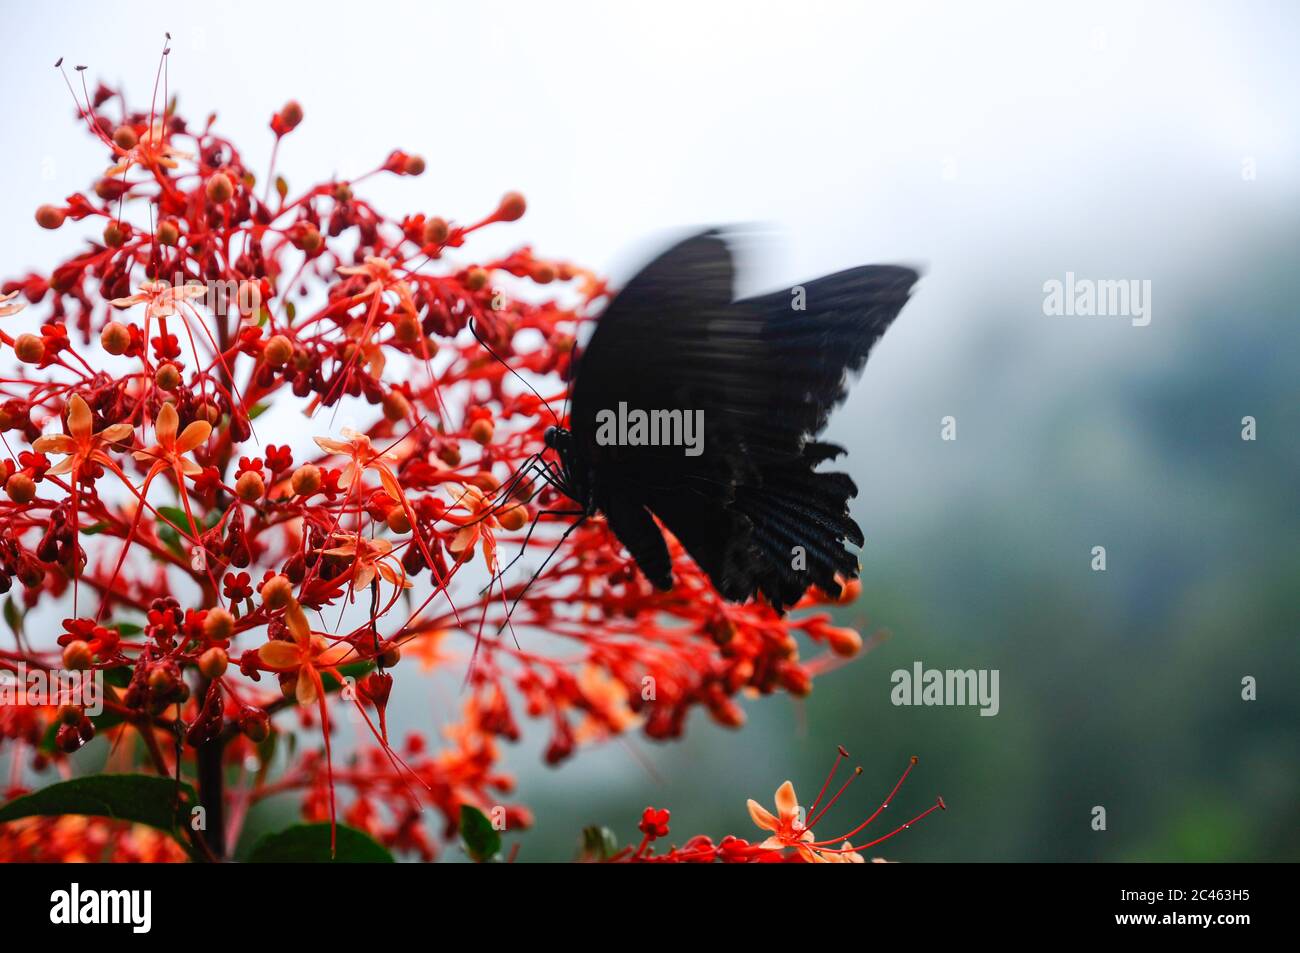 Beautiful tropical red flower Pagoda-Flower (Clerodendrum paniculatum) with a black Butterfly Great Mormon Swallowtail (Papilio memnon) Stock Photo